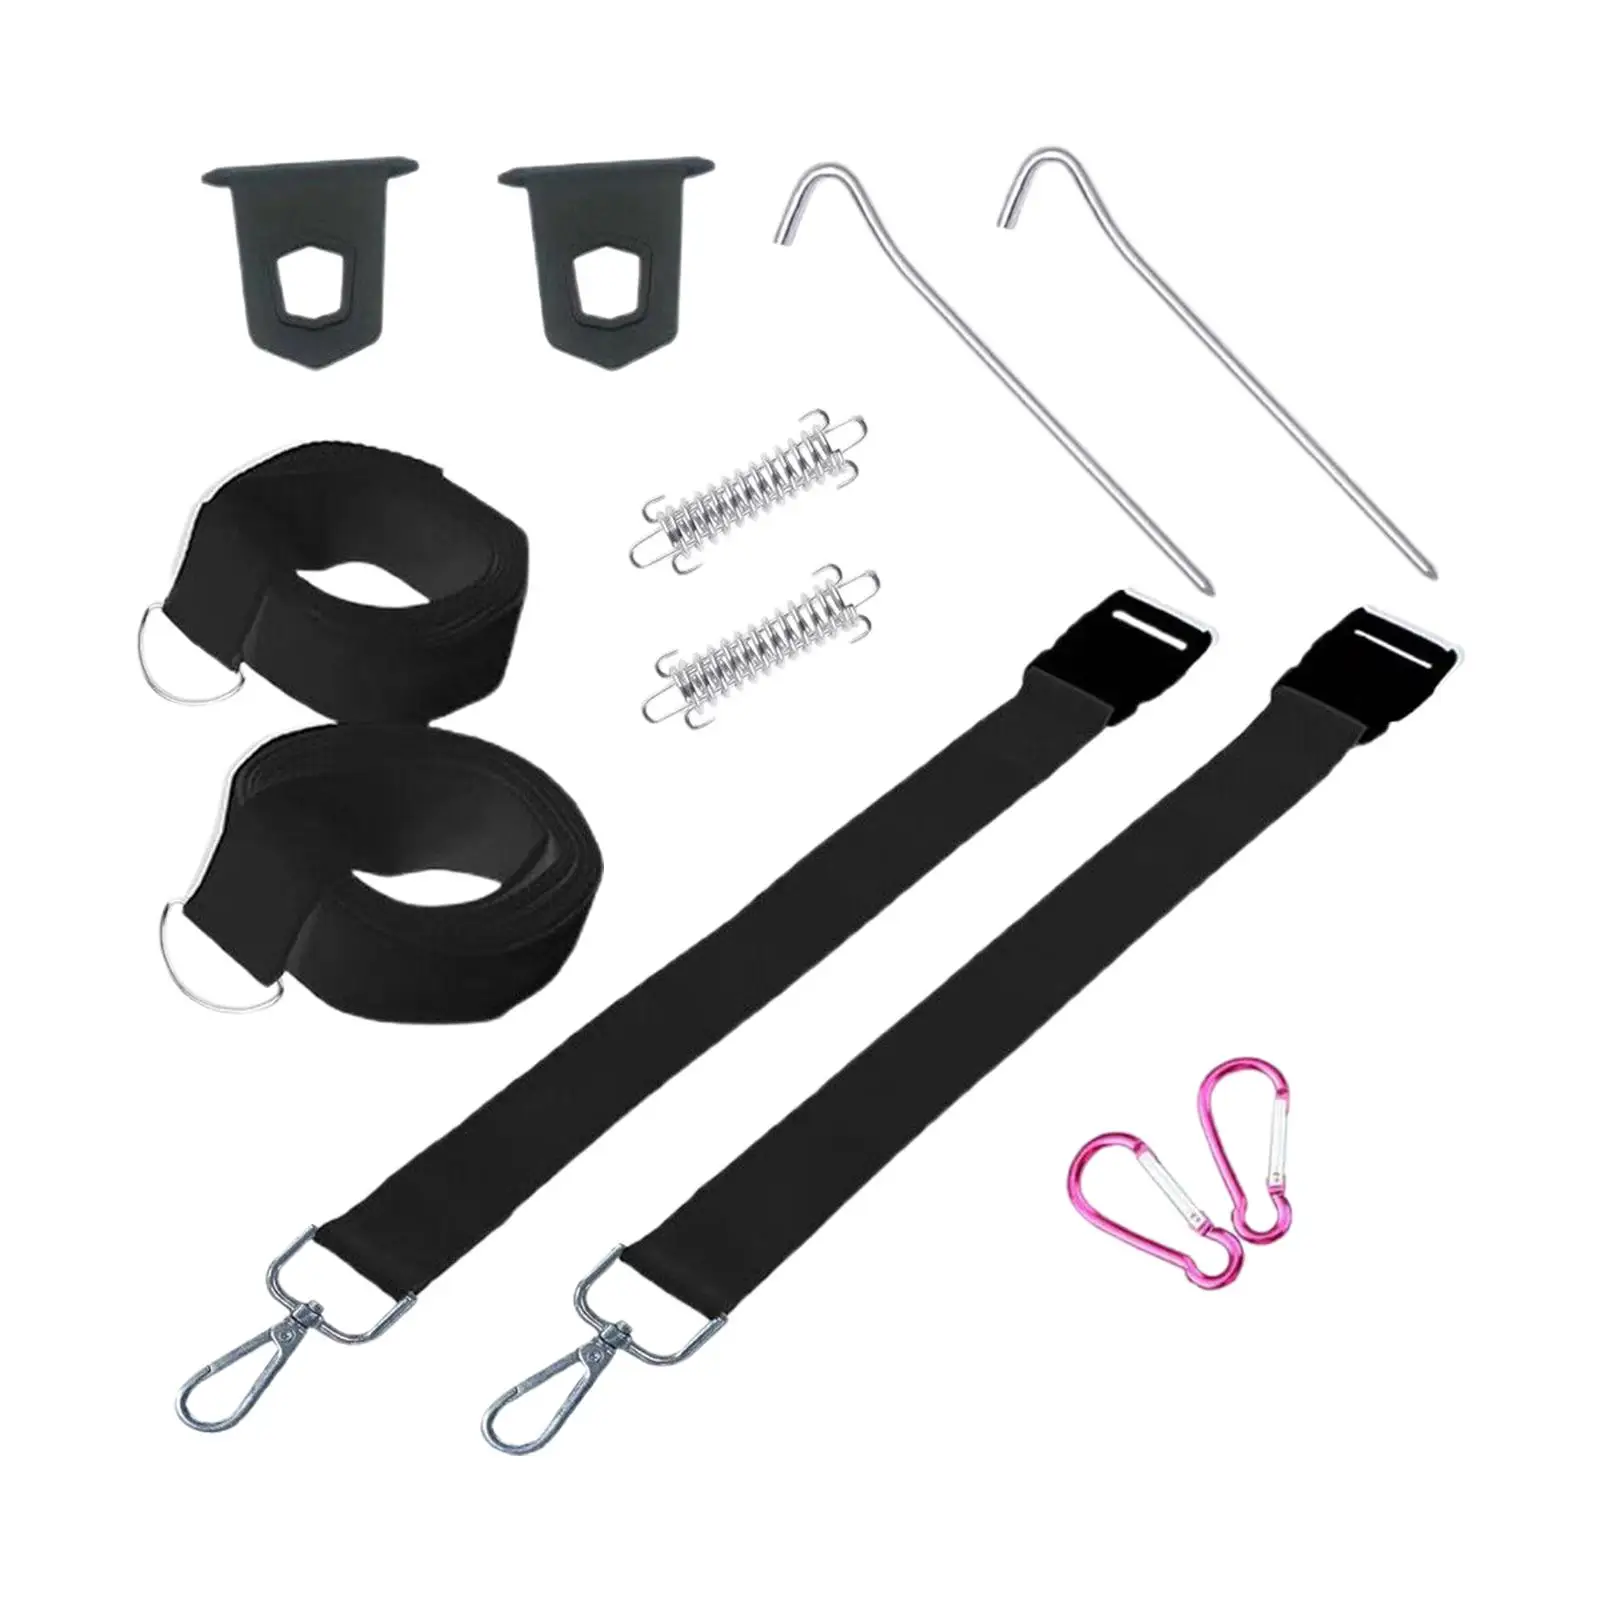 Awning Tie Down Set with Adjustable Band Universal Awning Clips for travel Camping Rail Track Tie Down Eyelet